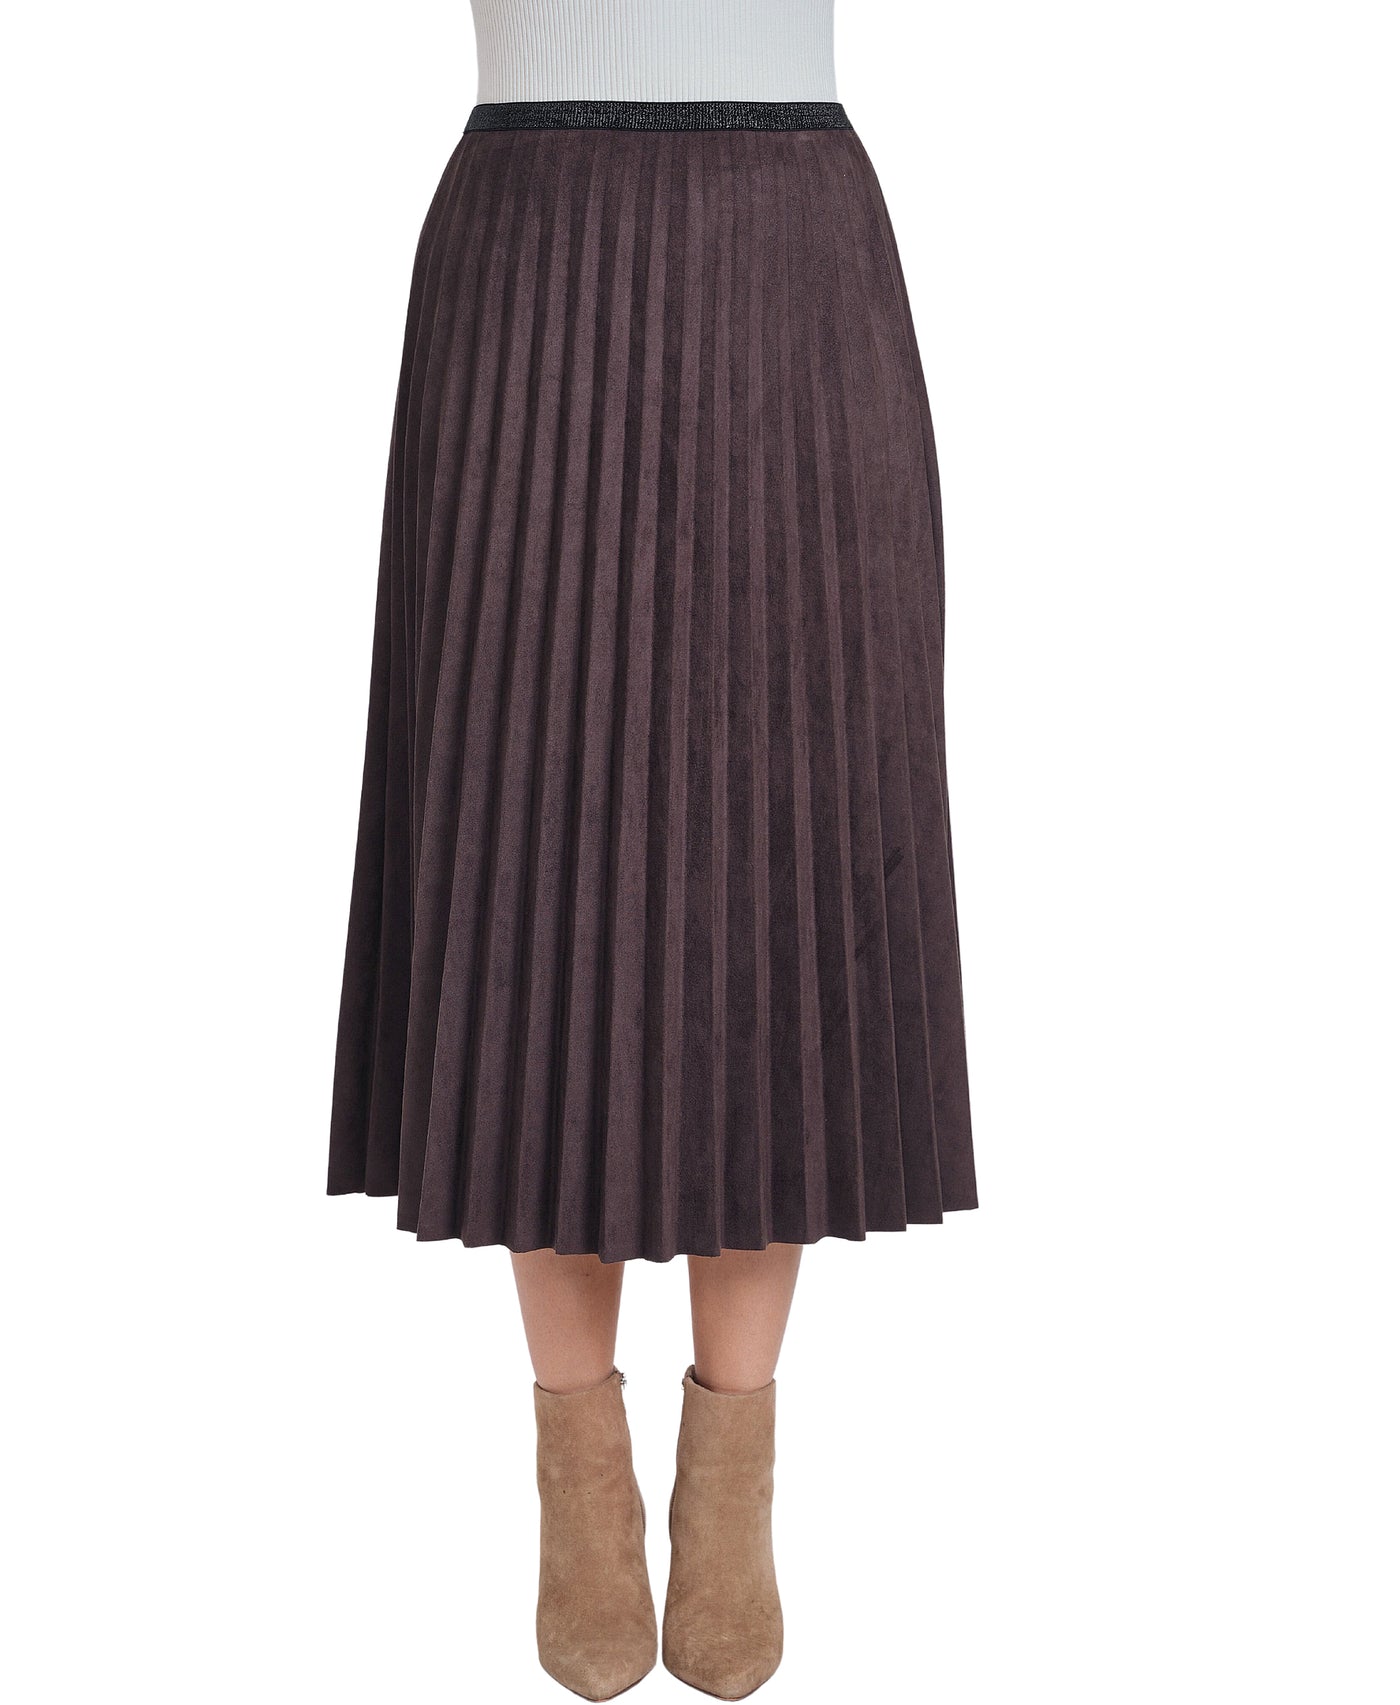 Pleated Faux Suede Midi Skirt image 1